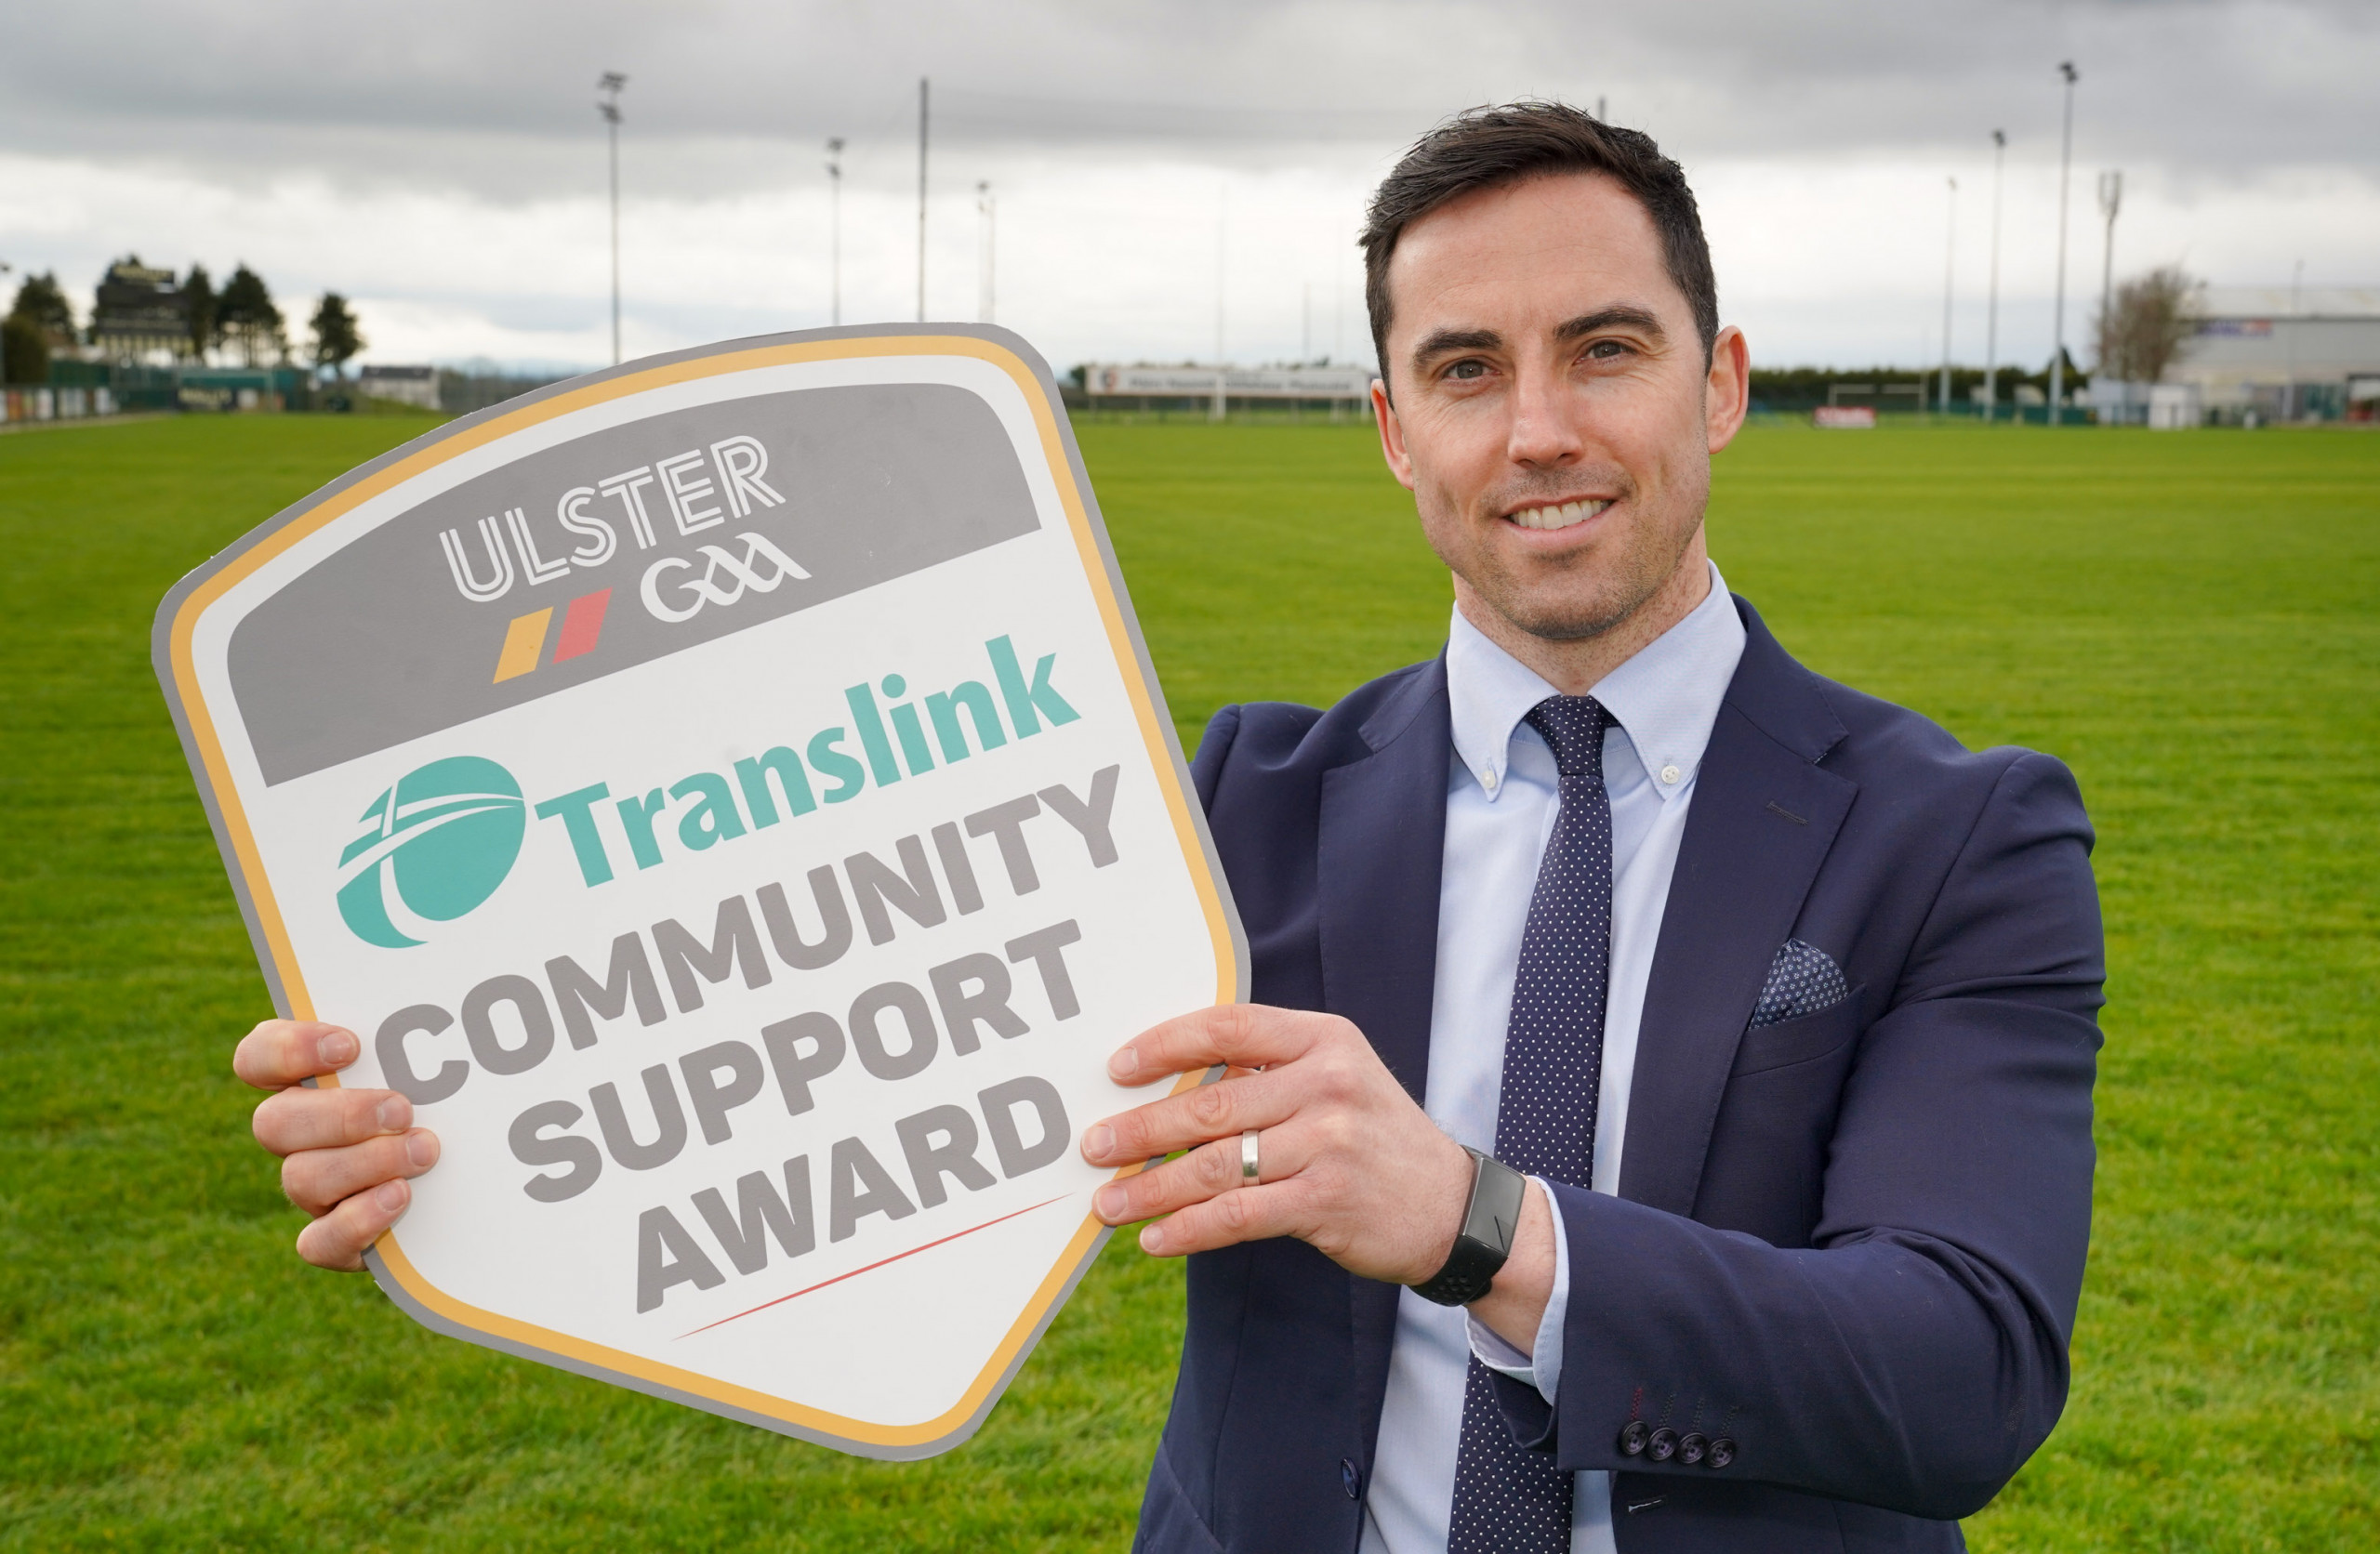 Ulster GAA and Translink launch Community Support Award for Clubs